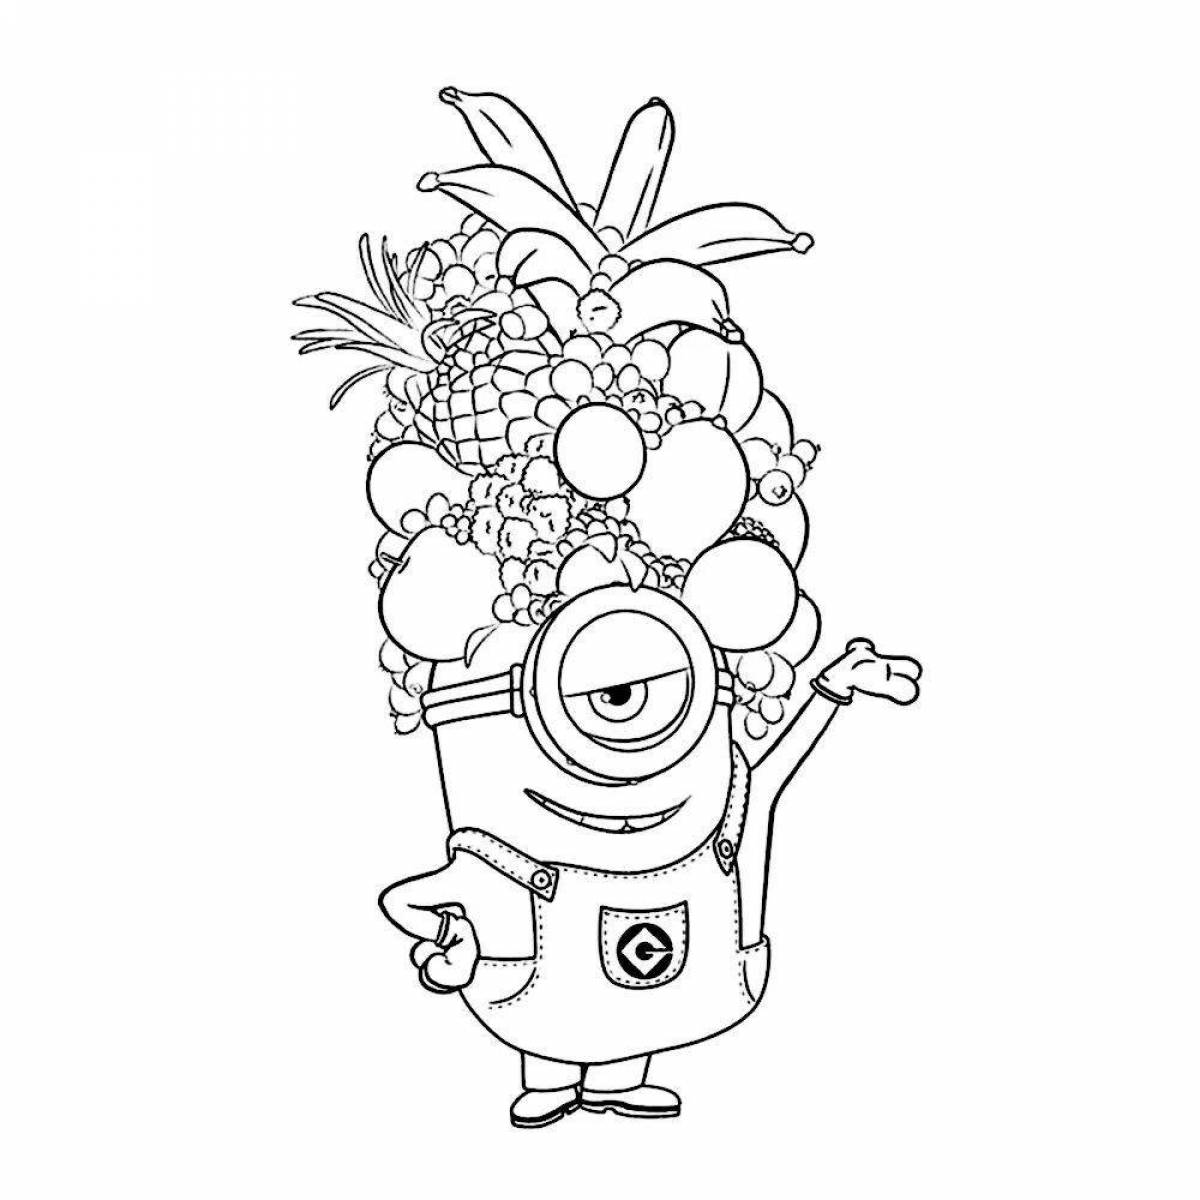 Color-frenzy coloring page minions для девочек